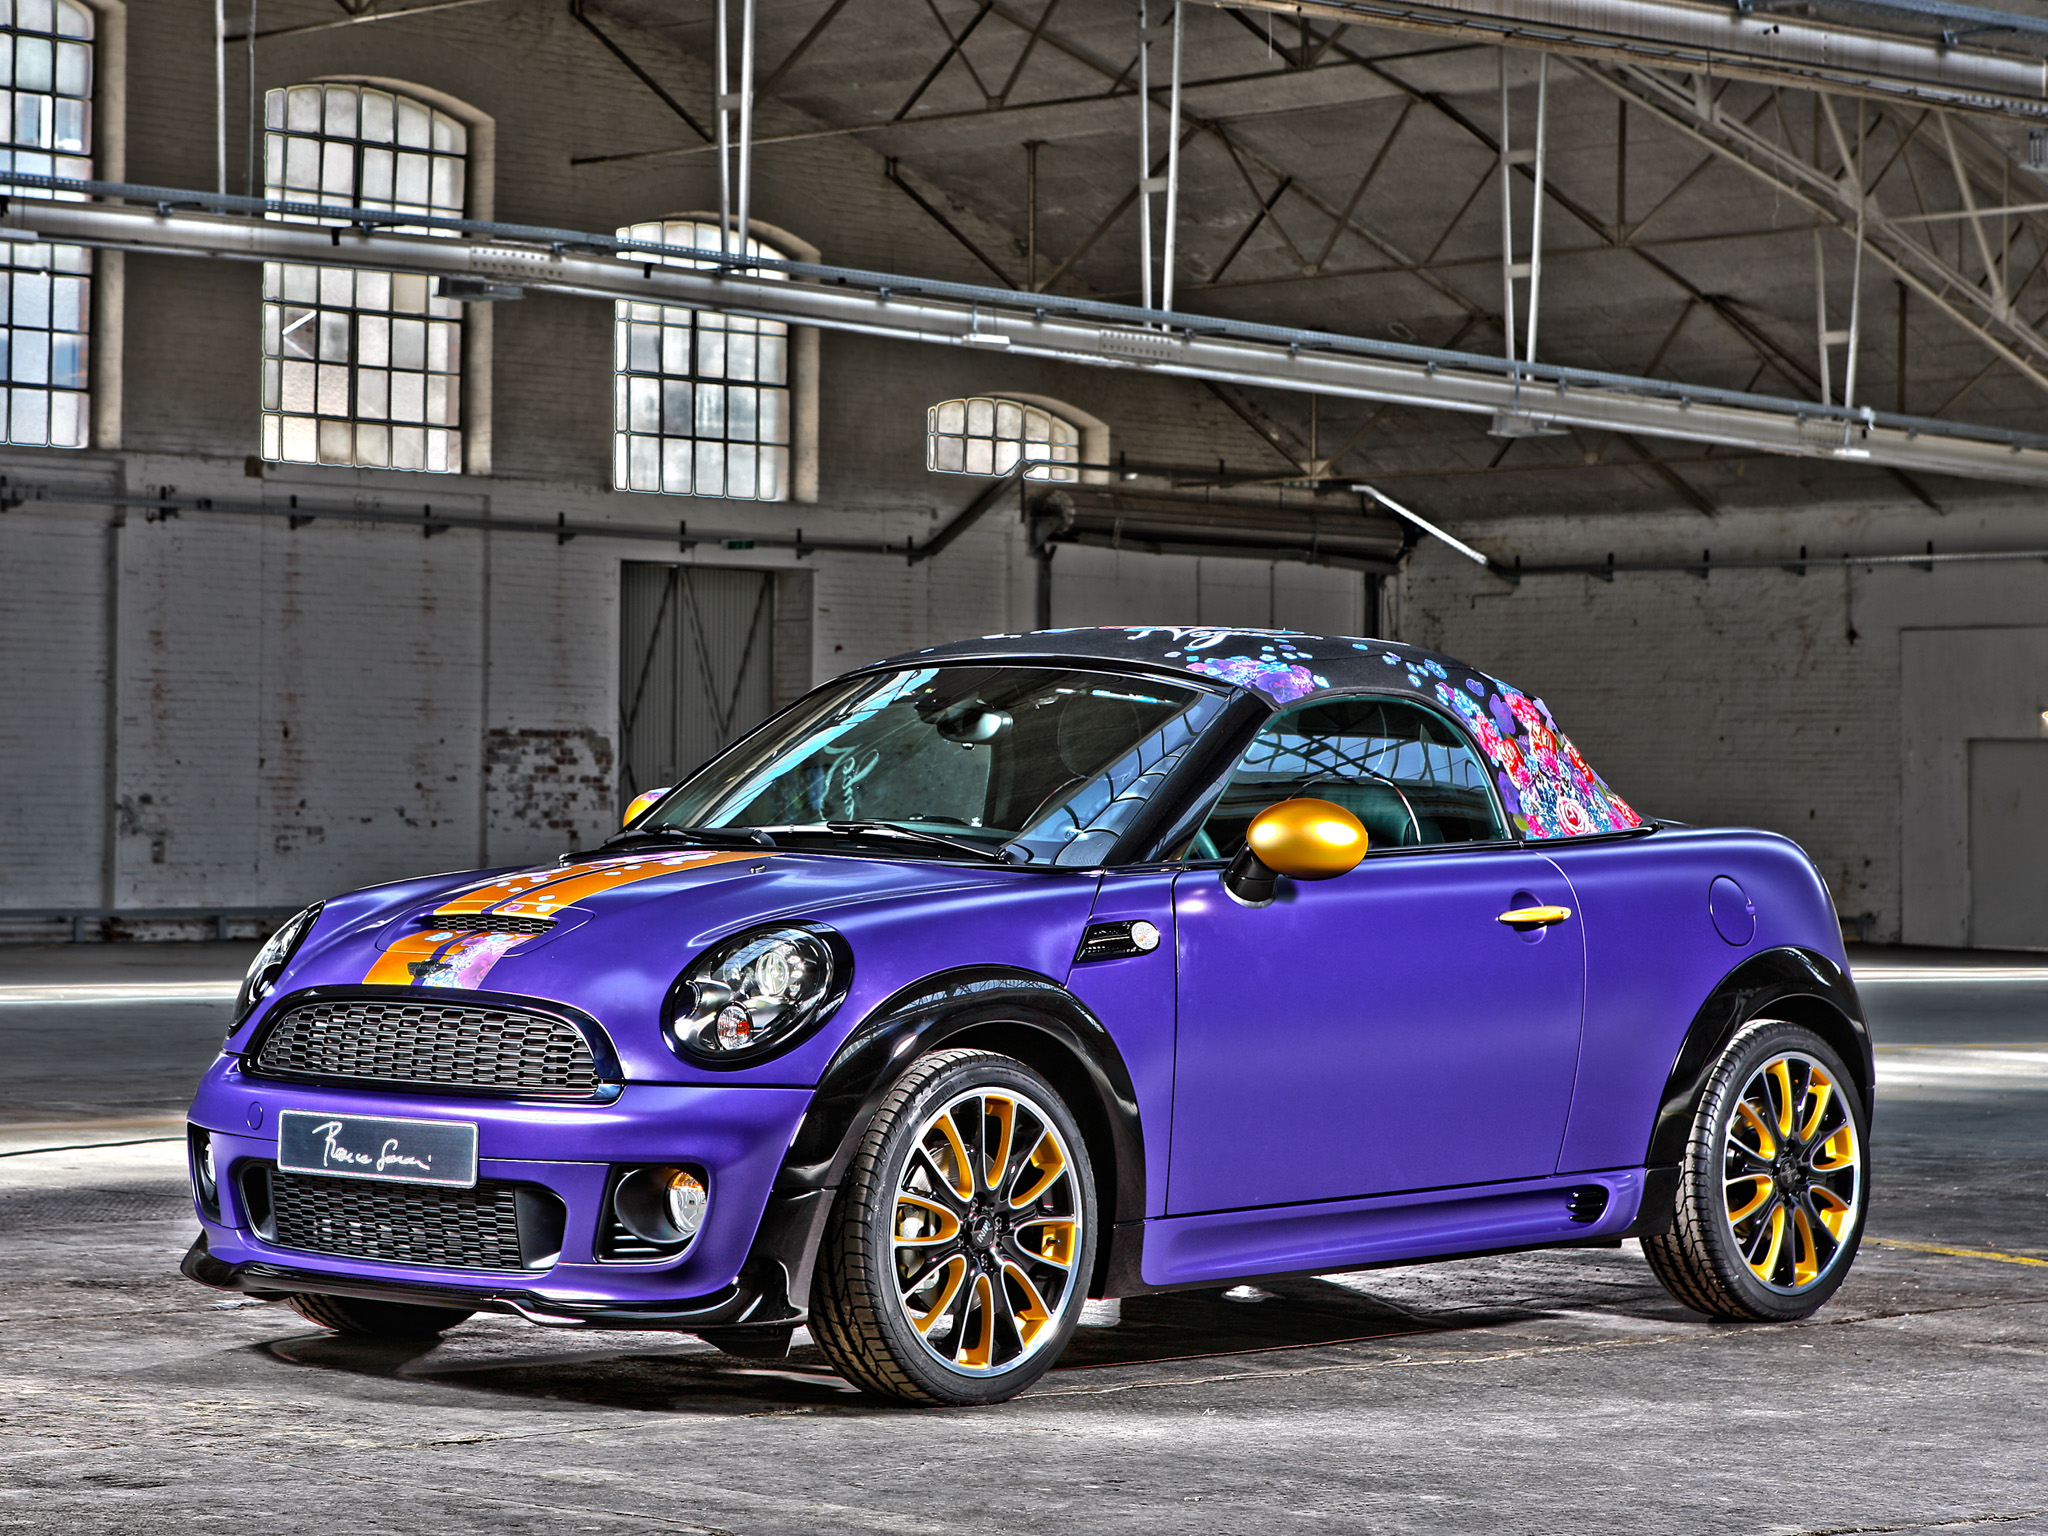 Mini Cooper S Roadster photos PhotoGallery with 9 pics CarsBase com